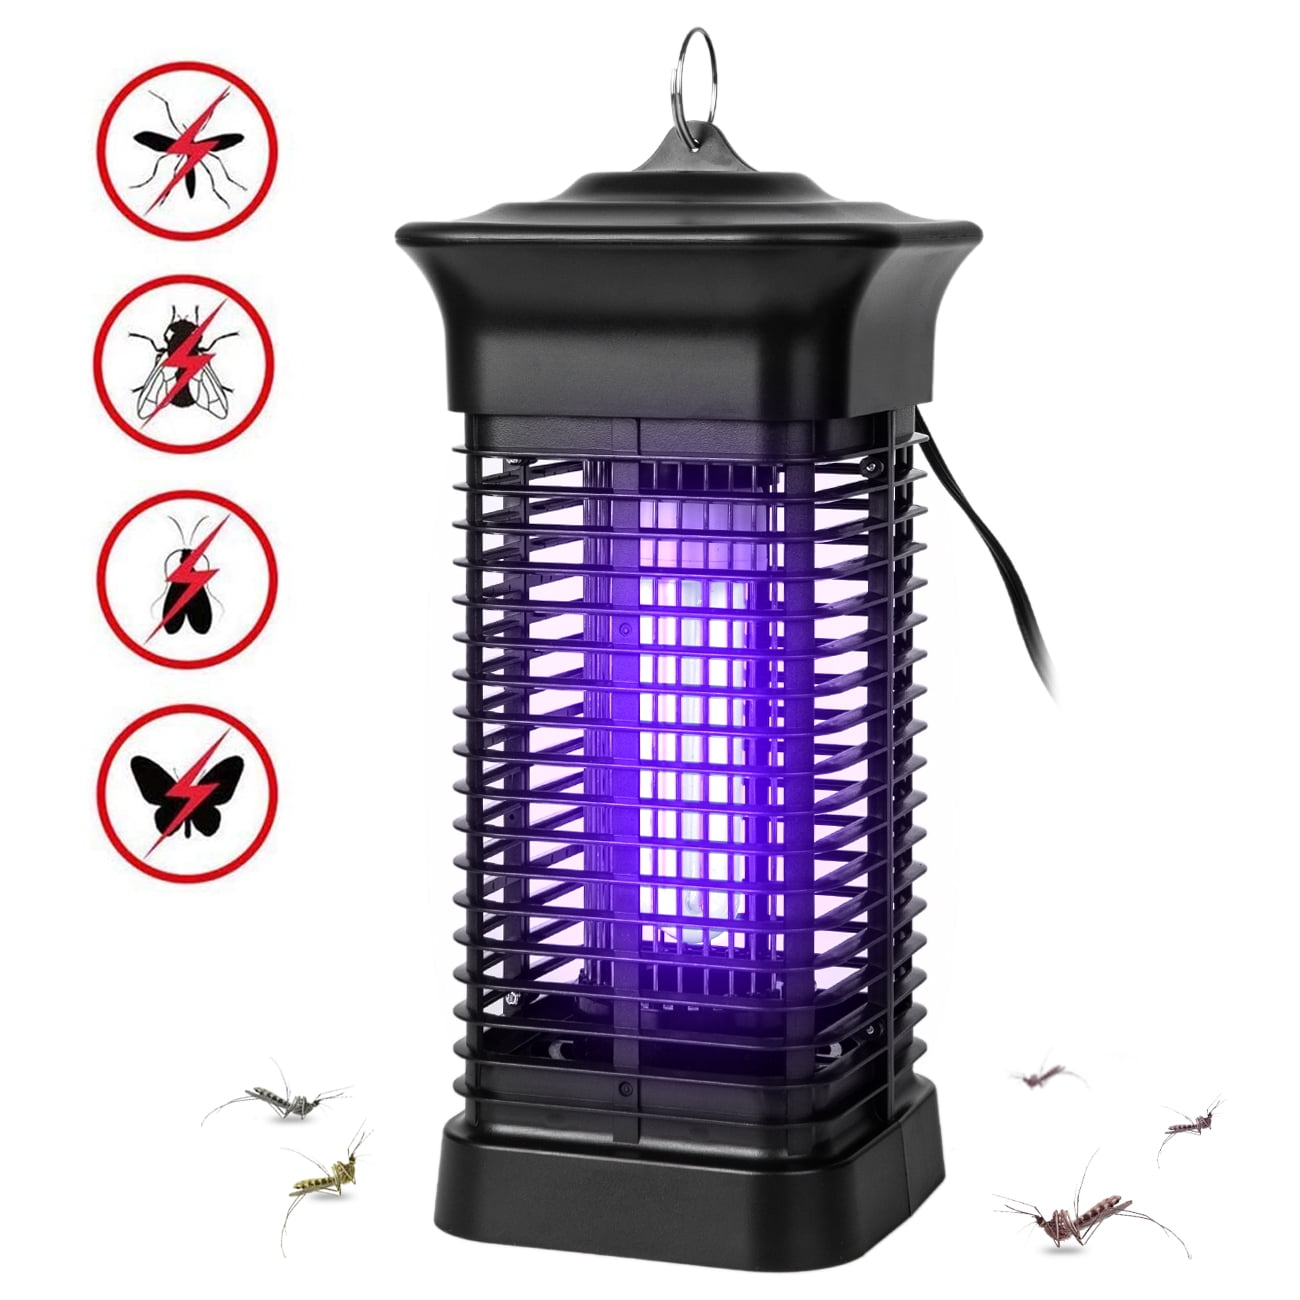 White Uonlytech Mosquito Zapper Bug Zapper Insects Killer Fly Trap USB Charge Power Lamp for Home Office Outdoor Indoor 